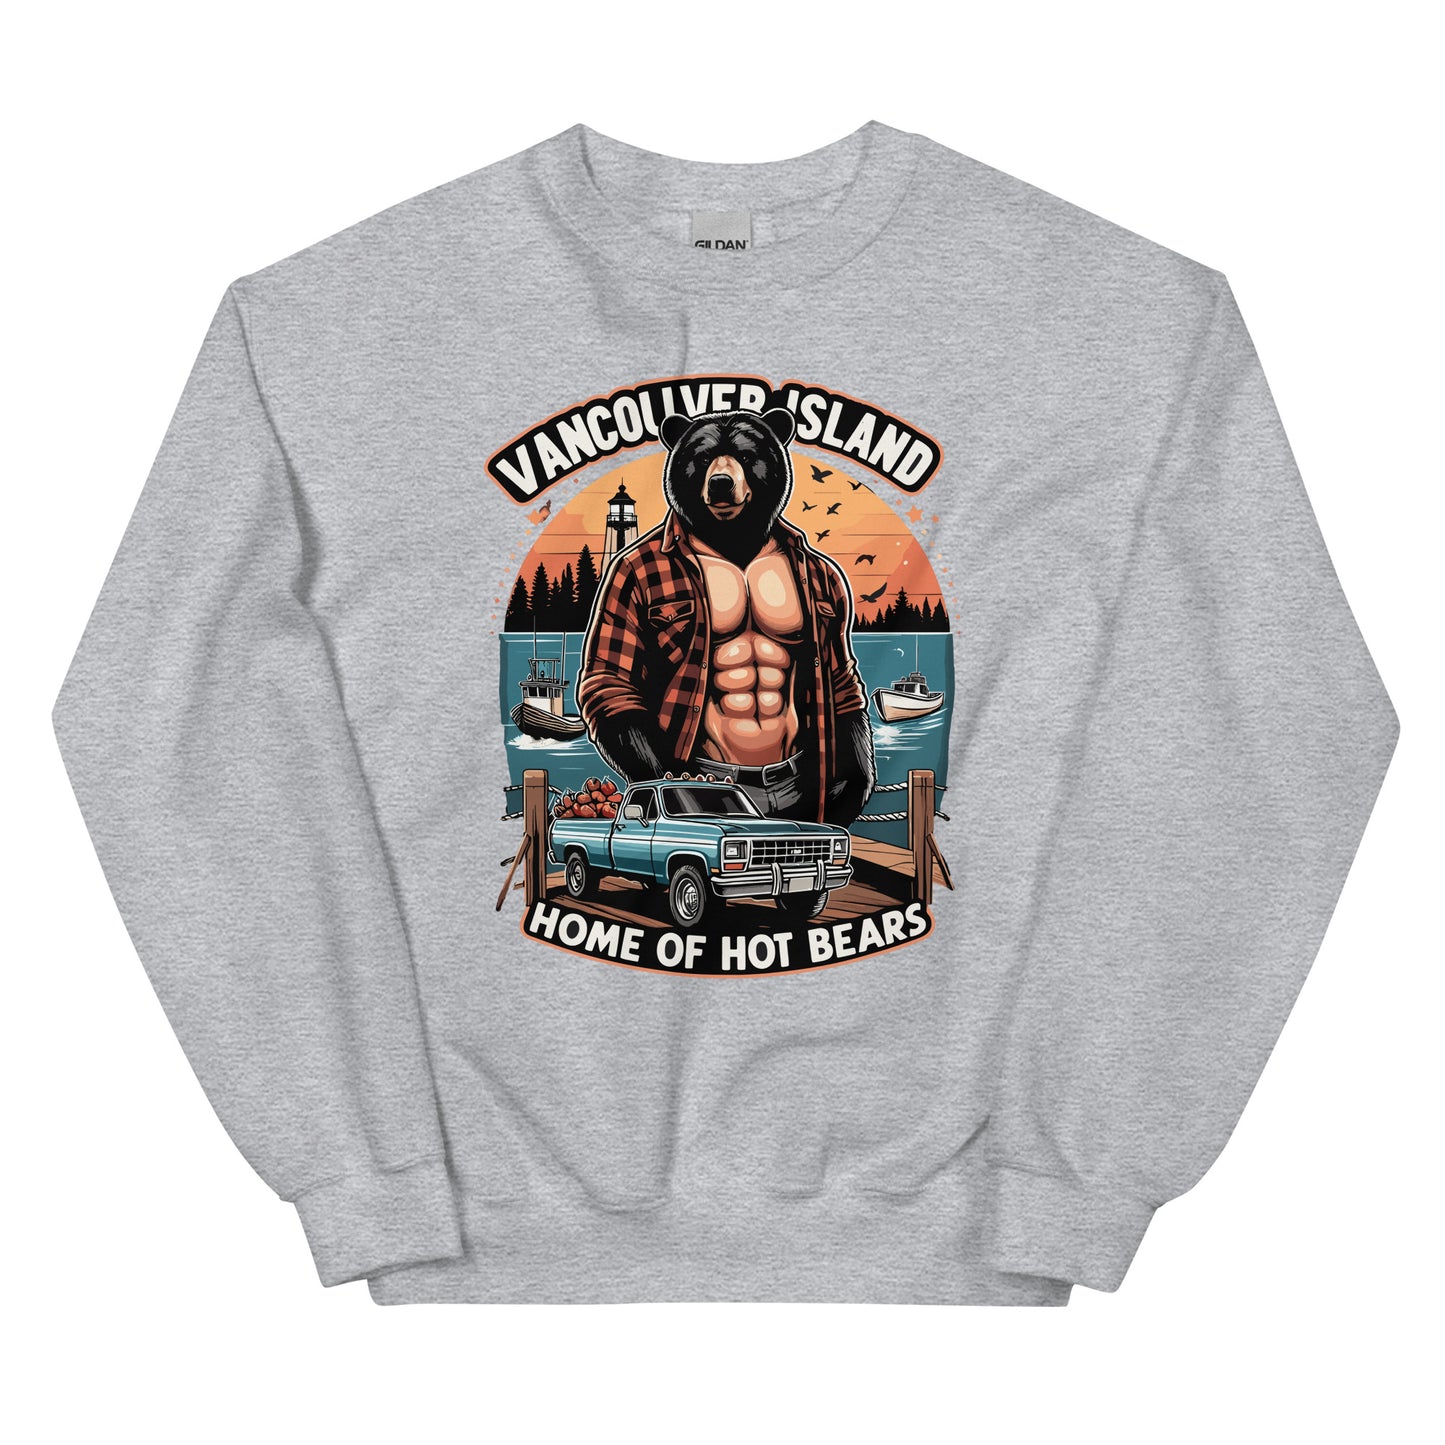 Vancouver Island Home of Bears print with a shirtless man with a bear head with a truck by the dock on the ocean printed on a crewneck sweatshirt by Whistler Shirts